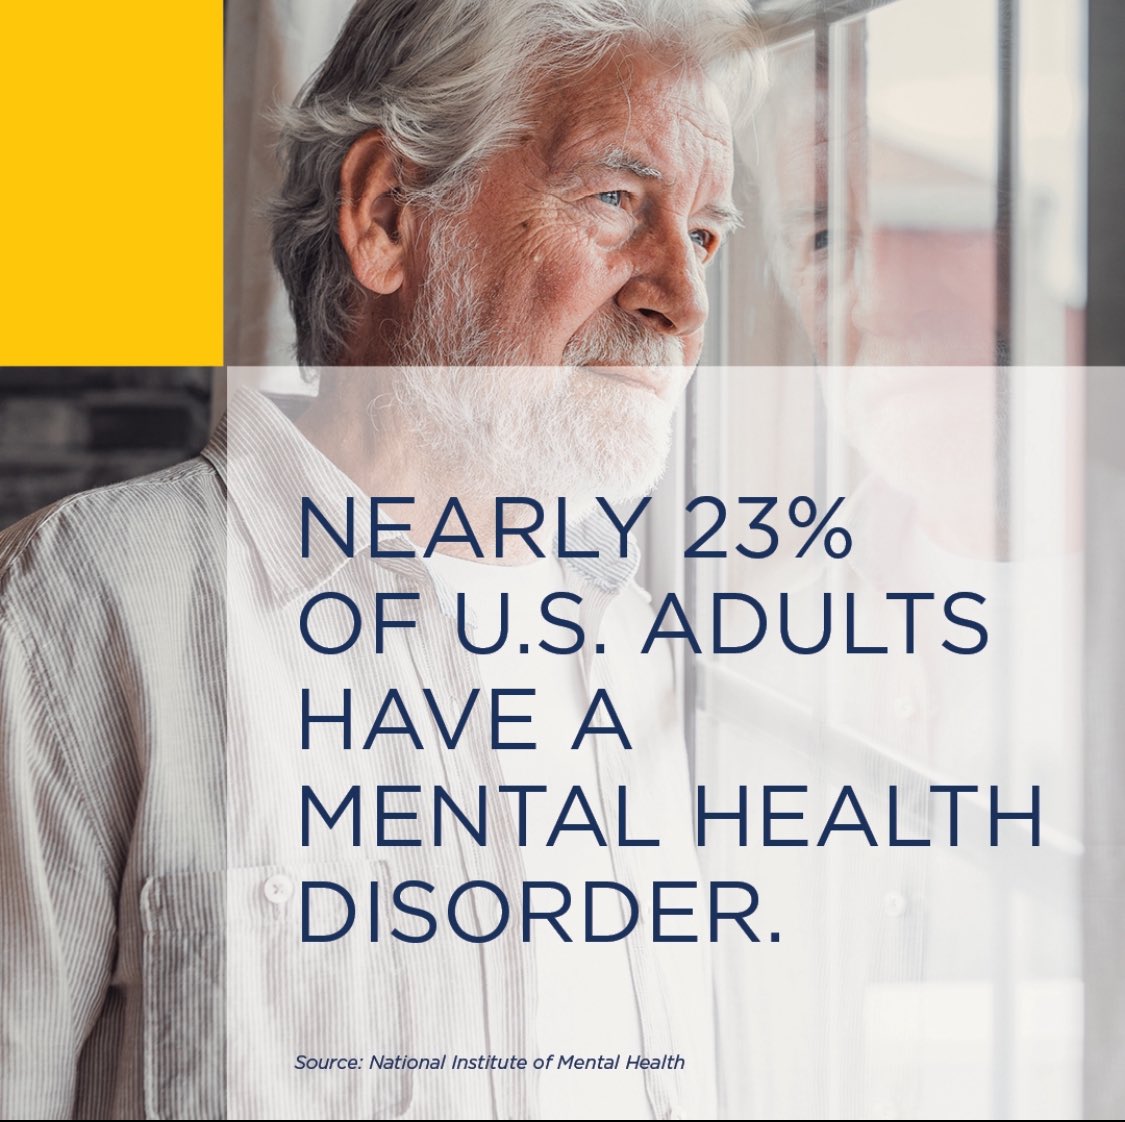 May is Mental Health Awareness Month, an important time to raise awareness and reduce the stigma. If you or someone you love is experiencing the signs and symptoms of a mental health disorder, you're not alone, it's important to seek medical help. #MentalHealth #MorethanEnough